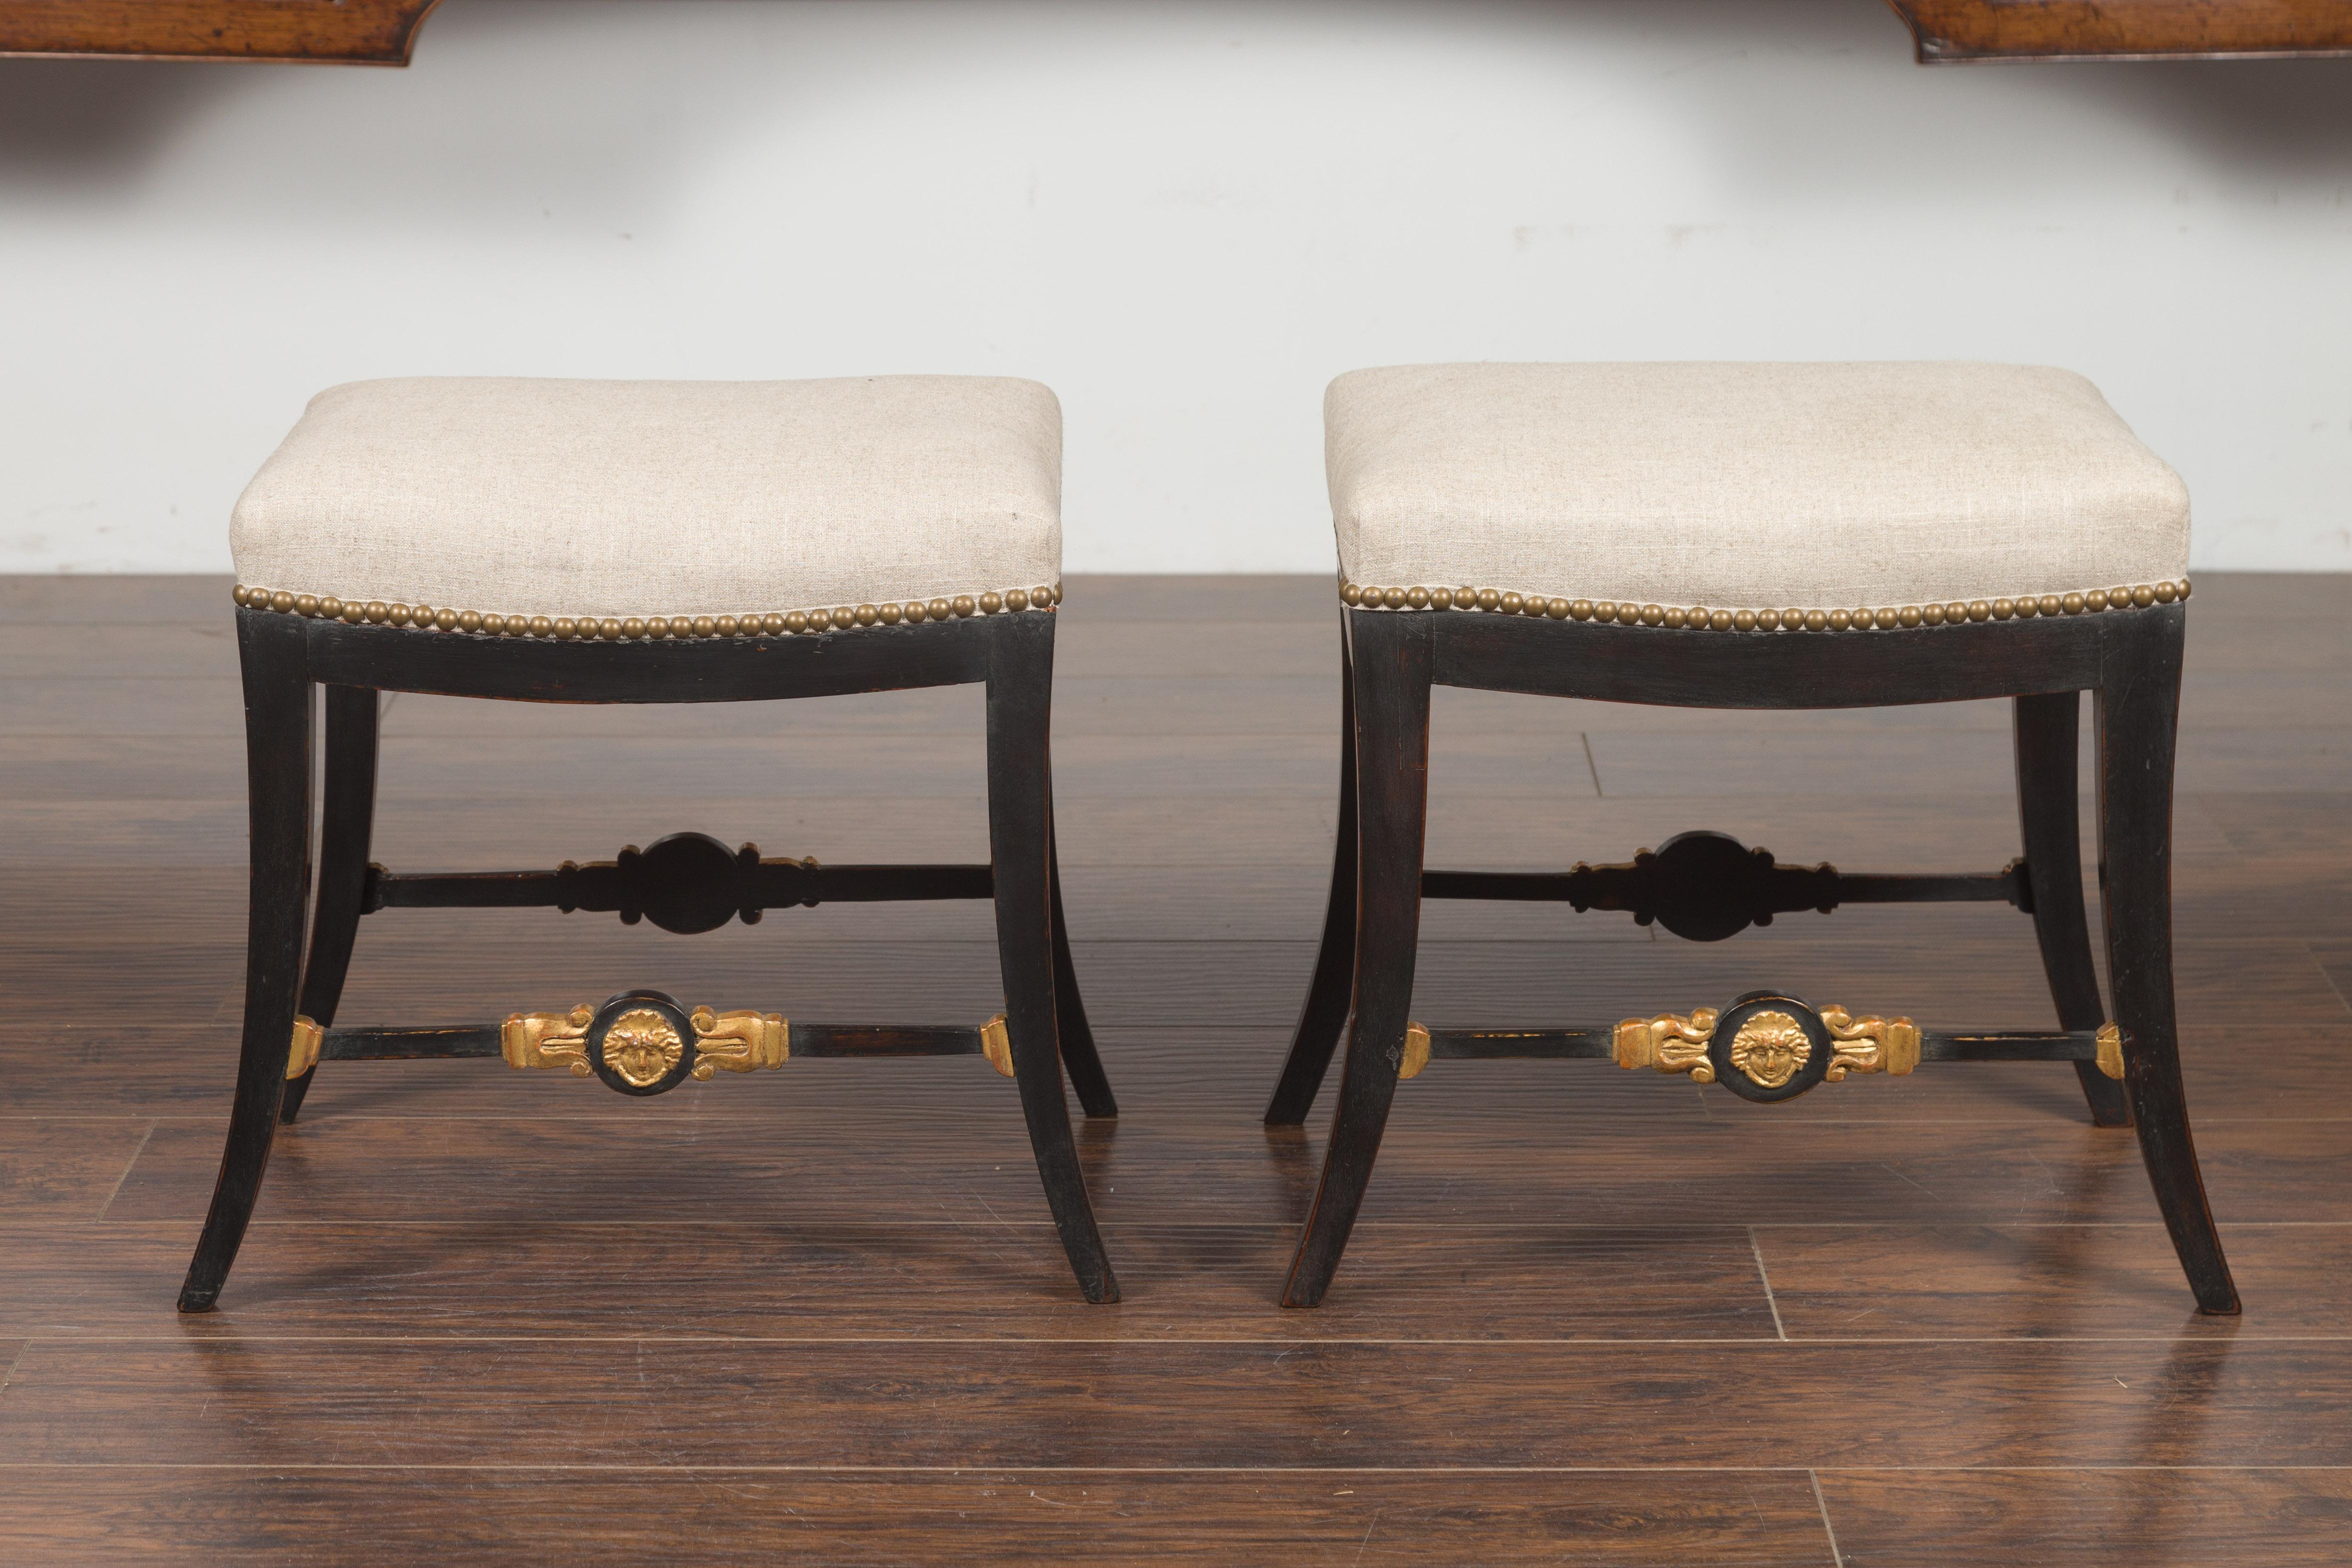 A pair of English Regency period ebonized and gilt stools from the early 19th century, with new upholstery. Created in England during the first quarter of the 19th century, each of this pair of Regency stools features a rectangular seat recently